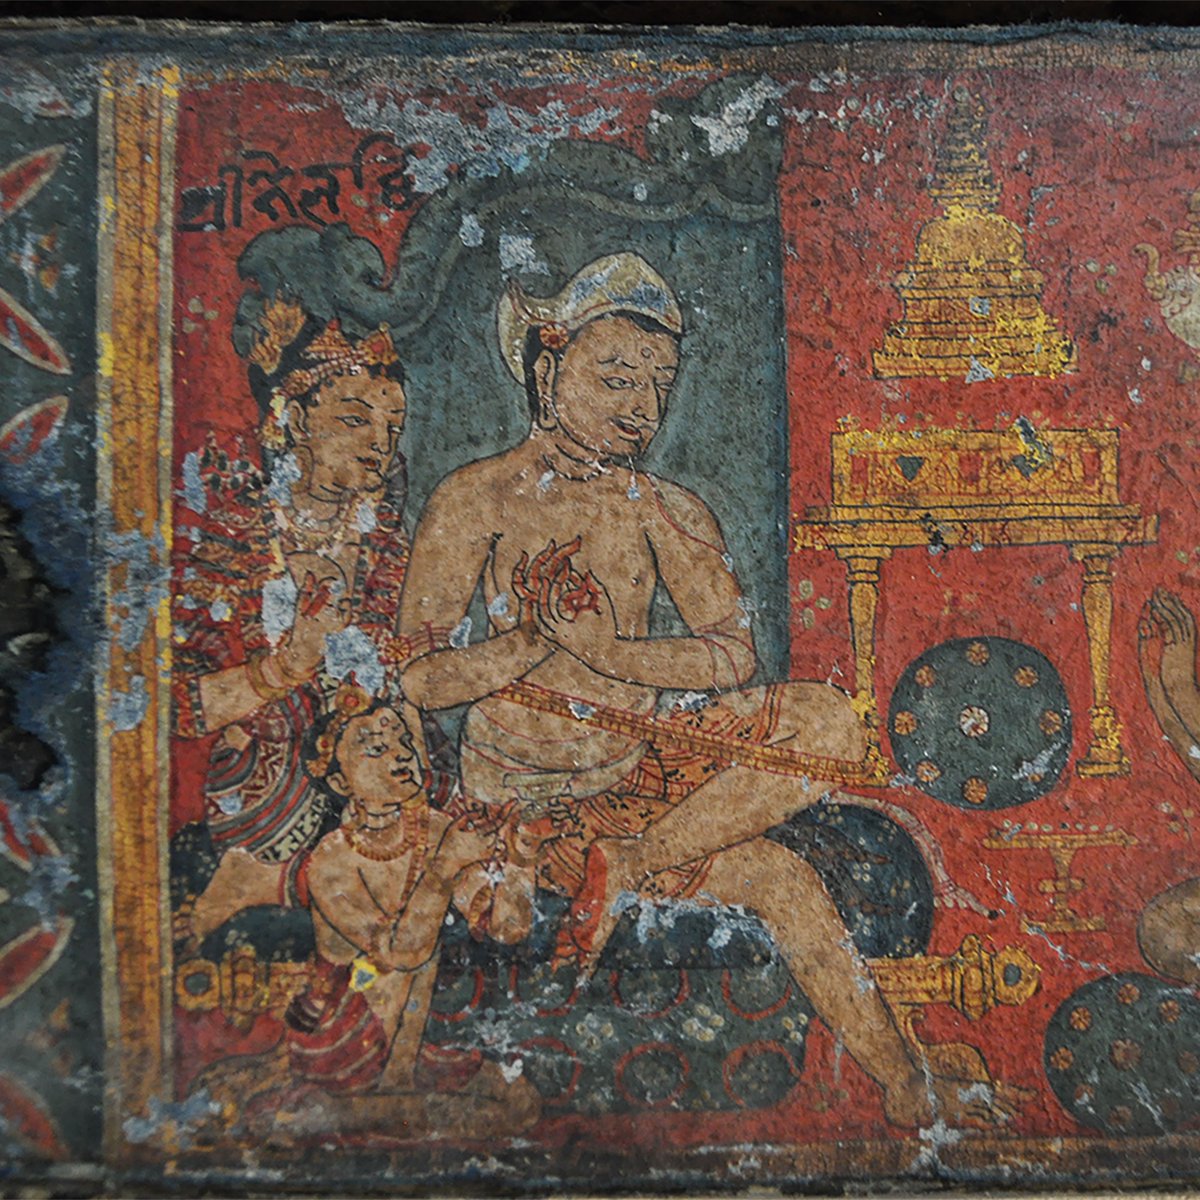 Join us and Dr. Jinah Kim at 6 pm tomorrow for a HESCAH Talk looking at the role of women in various artworks from Buddhist, Hindu and Himalayan cultures.